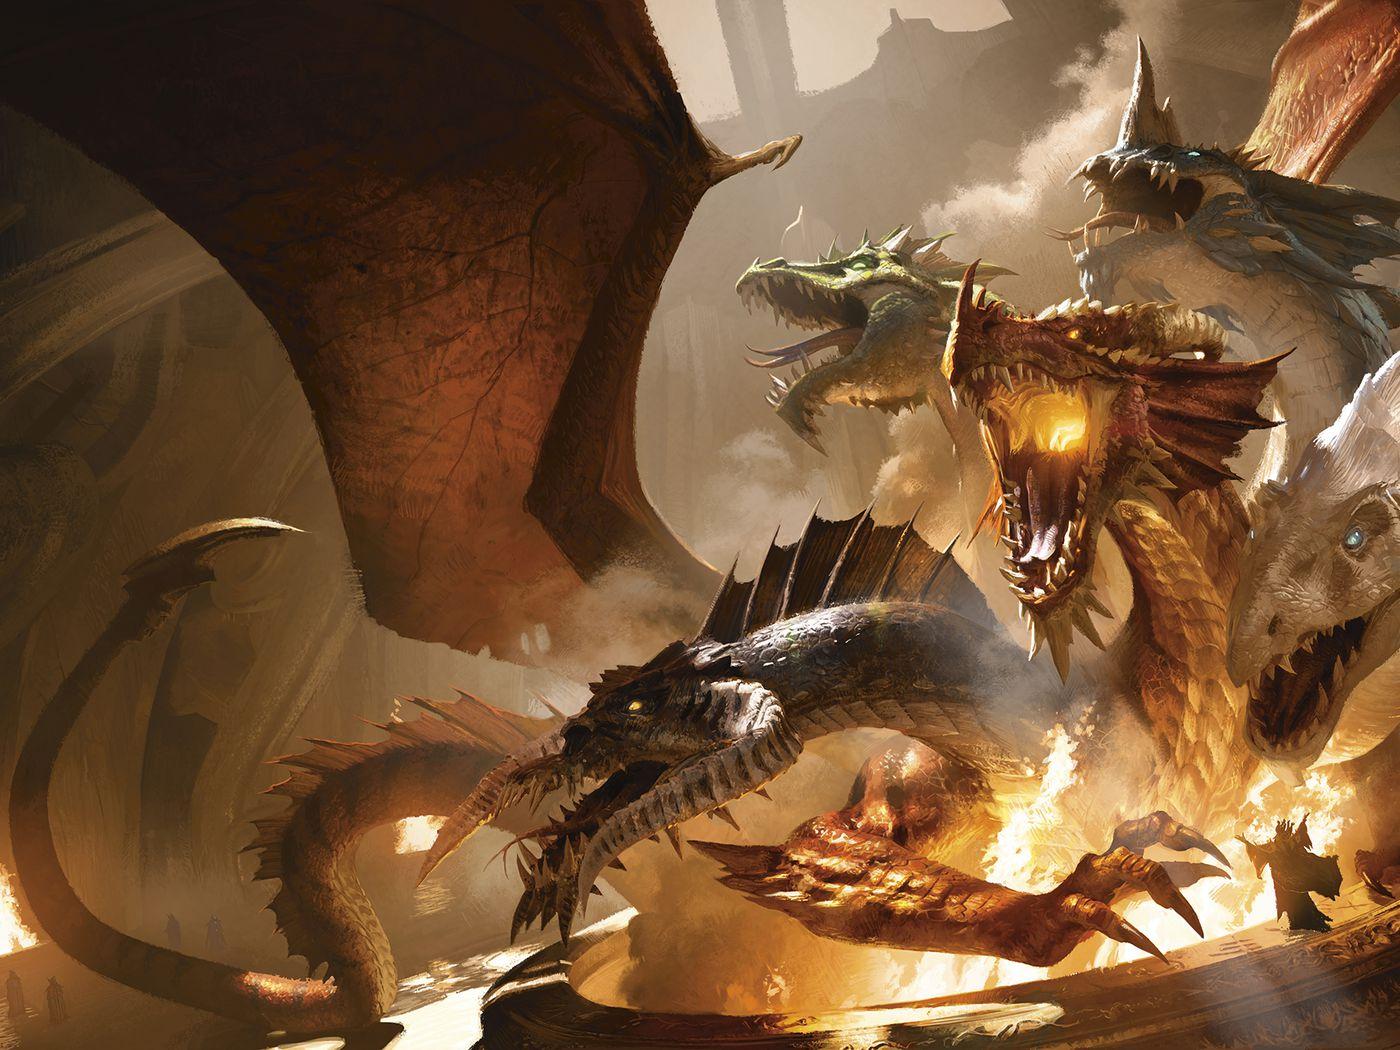 Dungeons & Dragons books are buy get 1 free